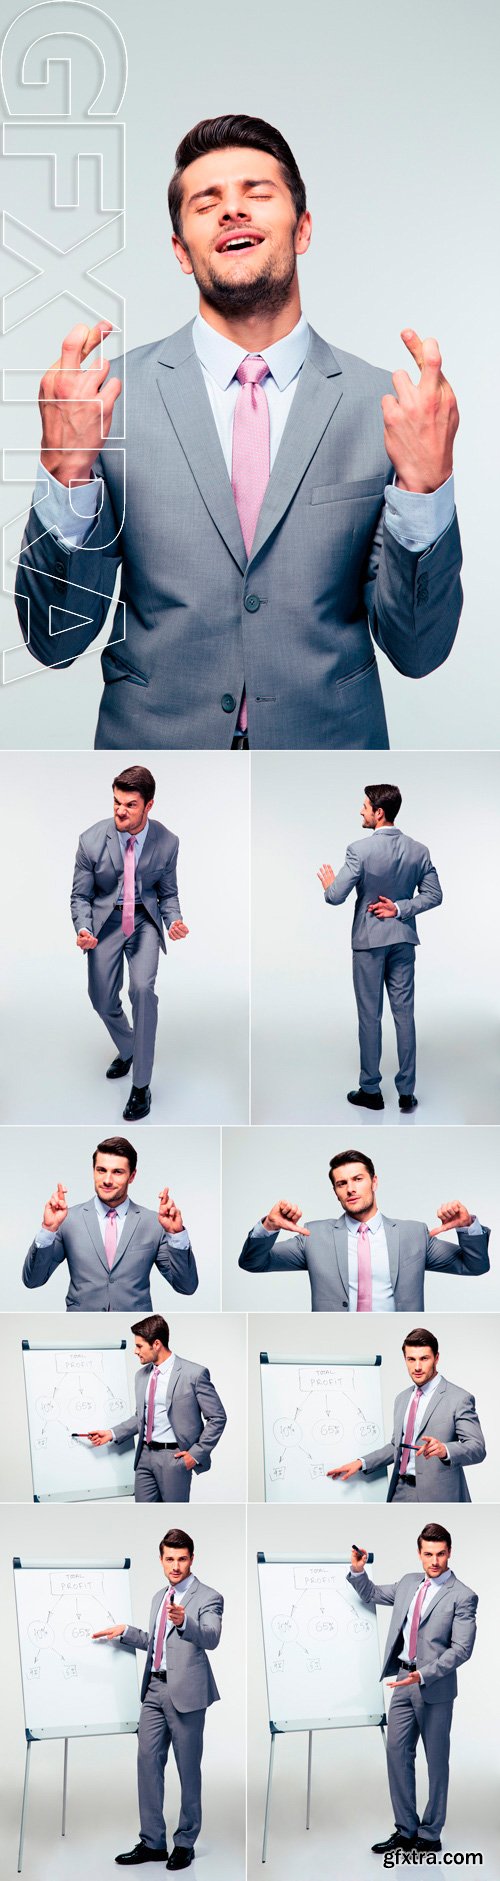 Stock Photos - Handsome businessman over gray background